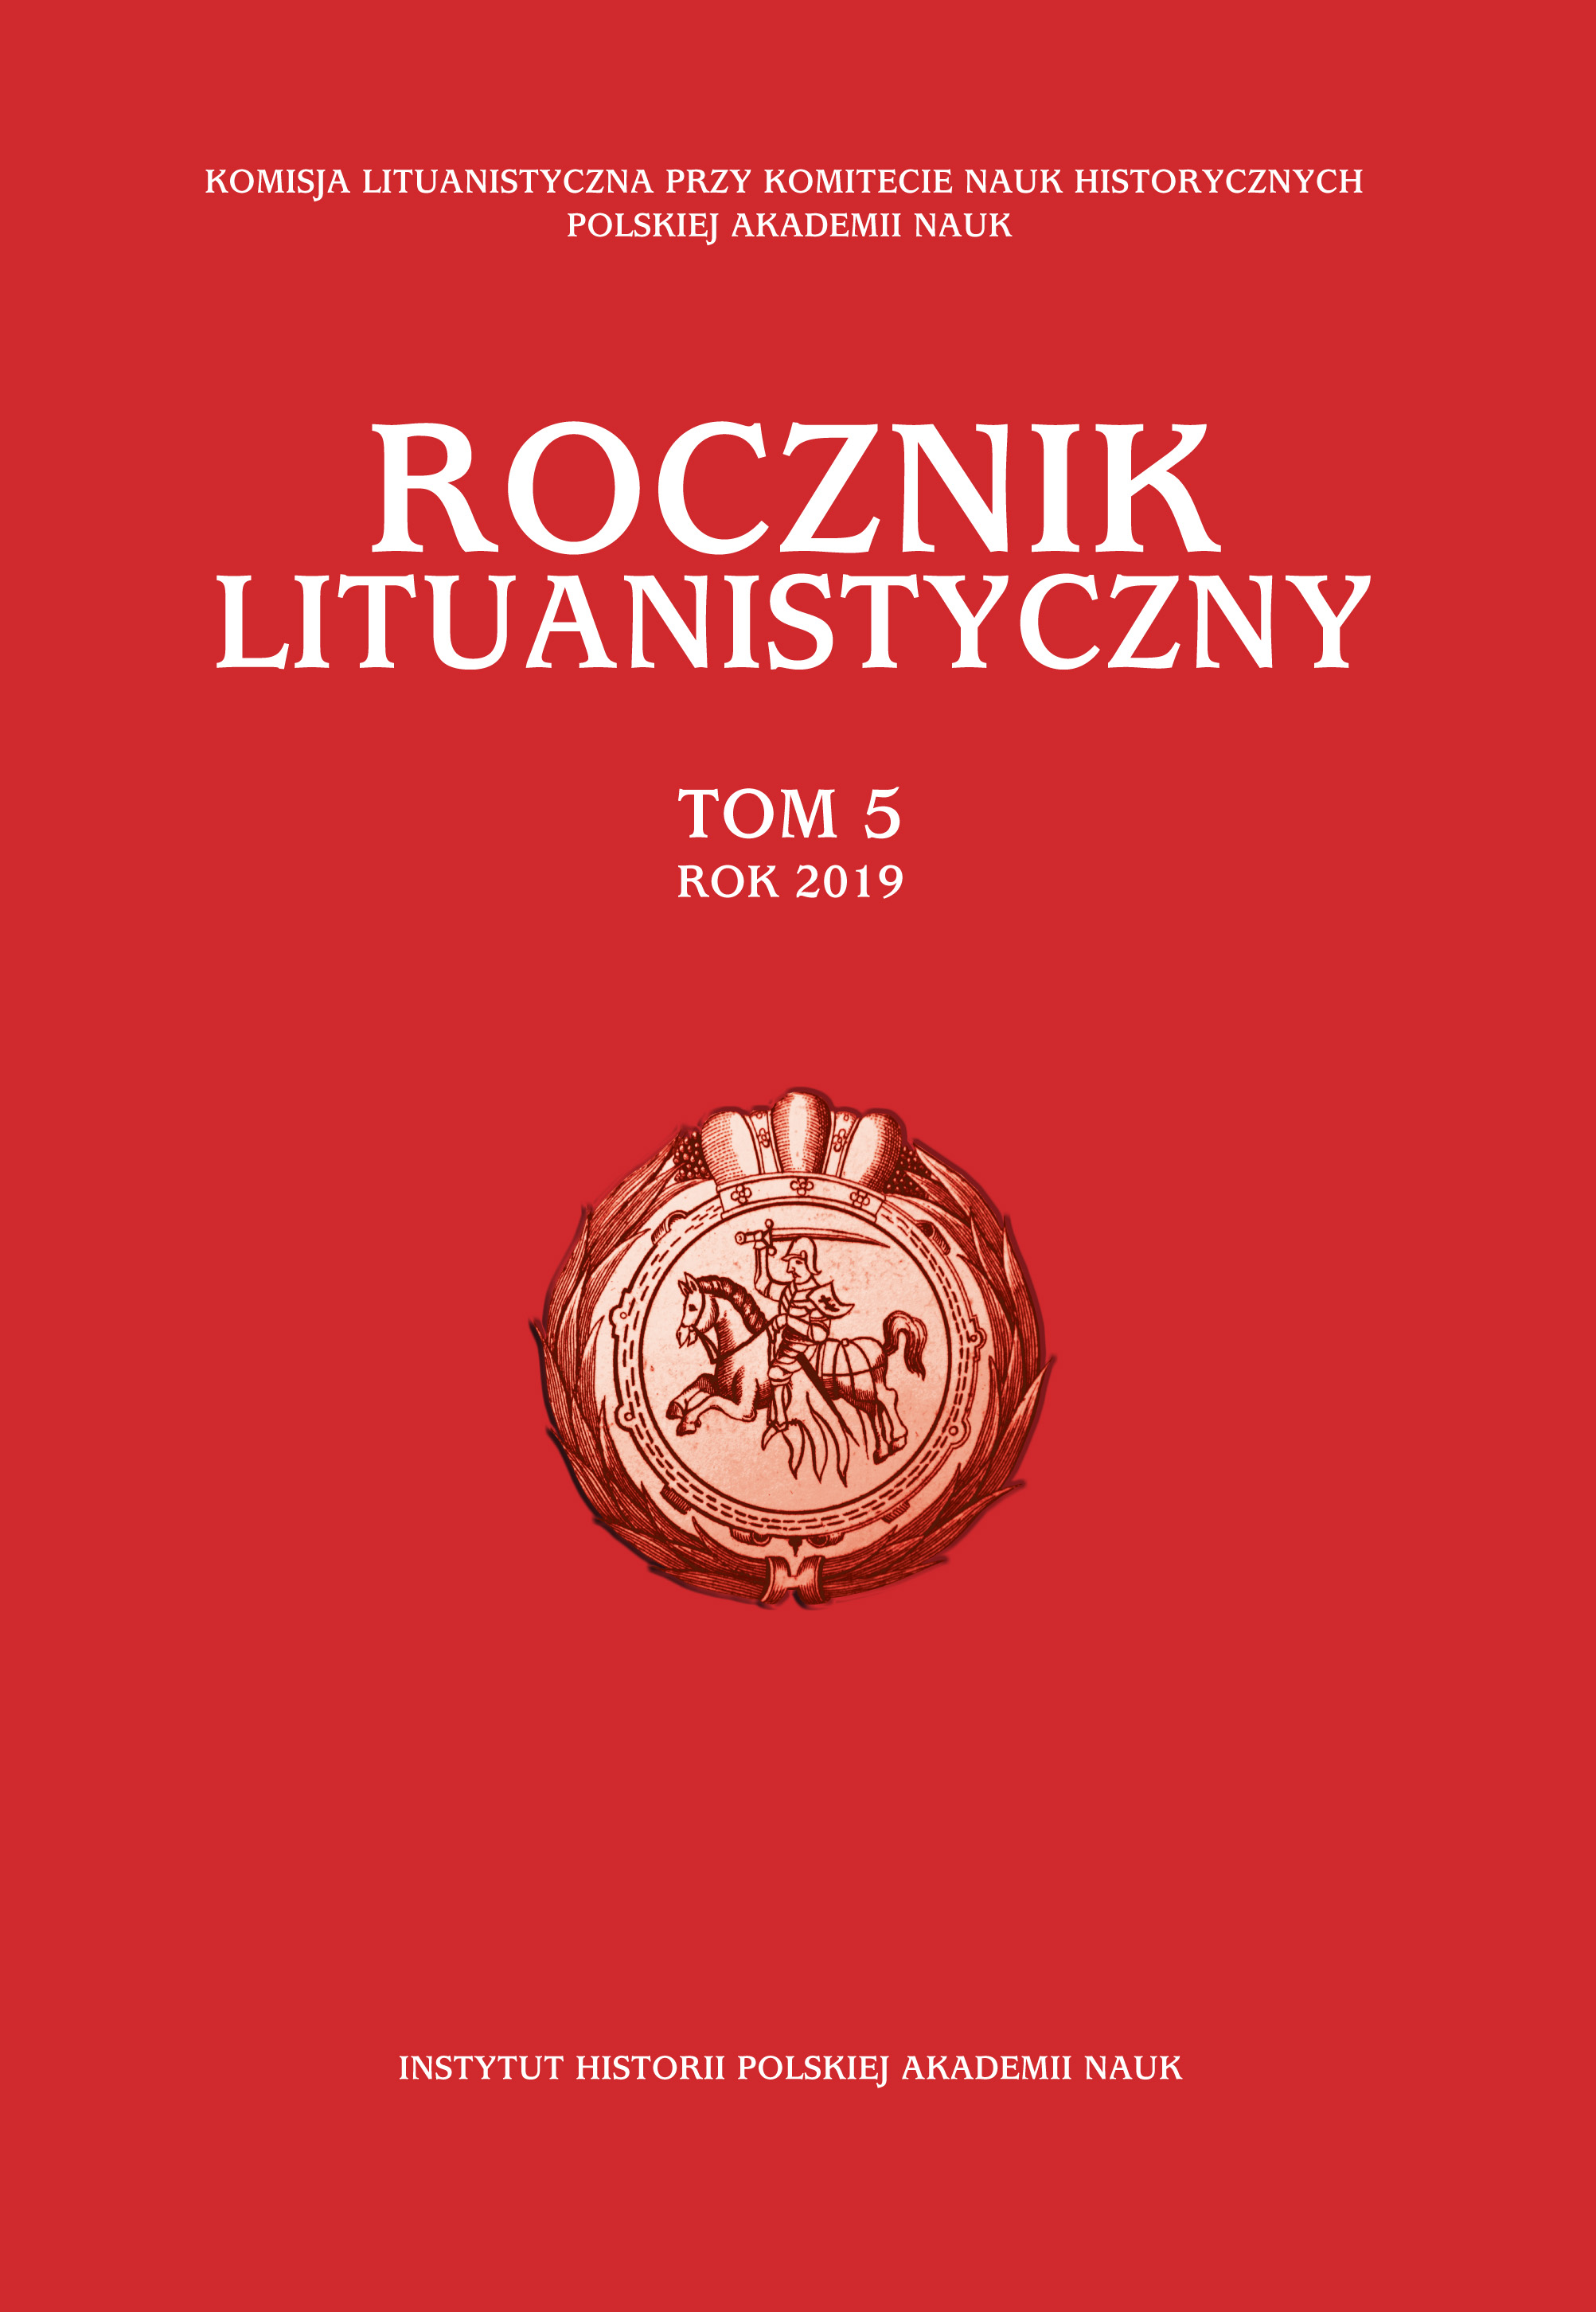 “Register of Dead Relatives”. Unknown Materials for the Image of the Religious and Family Life of Tartars in Lithuania in the Nineteenth Century Cover Image